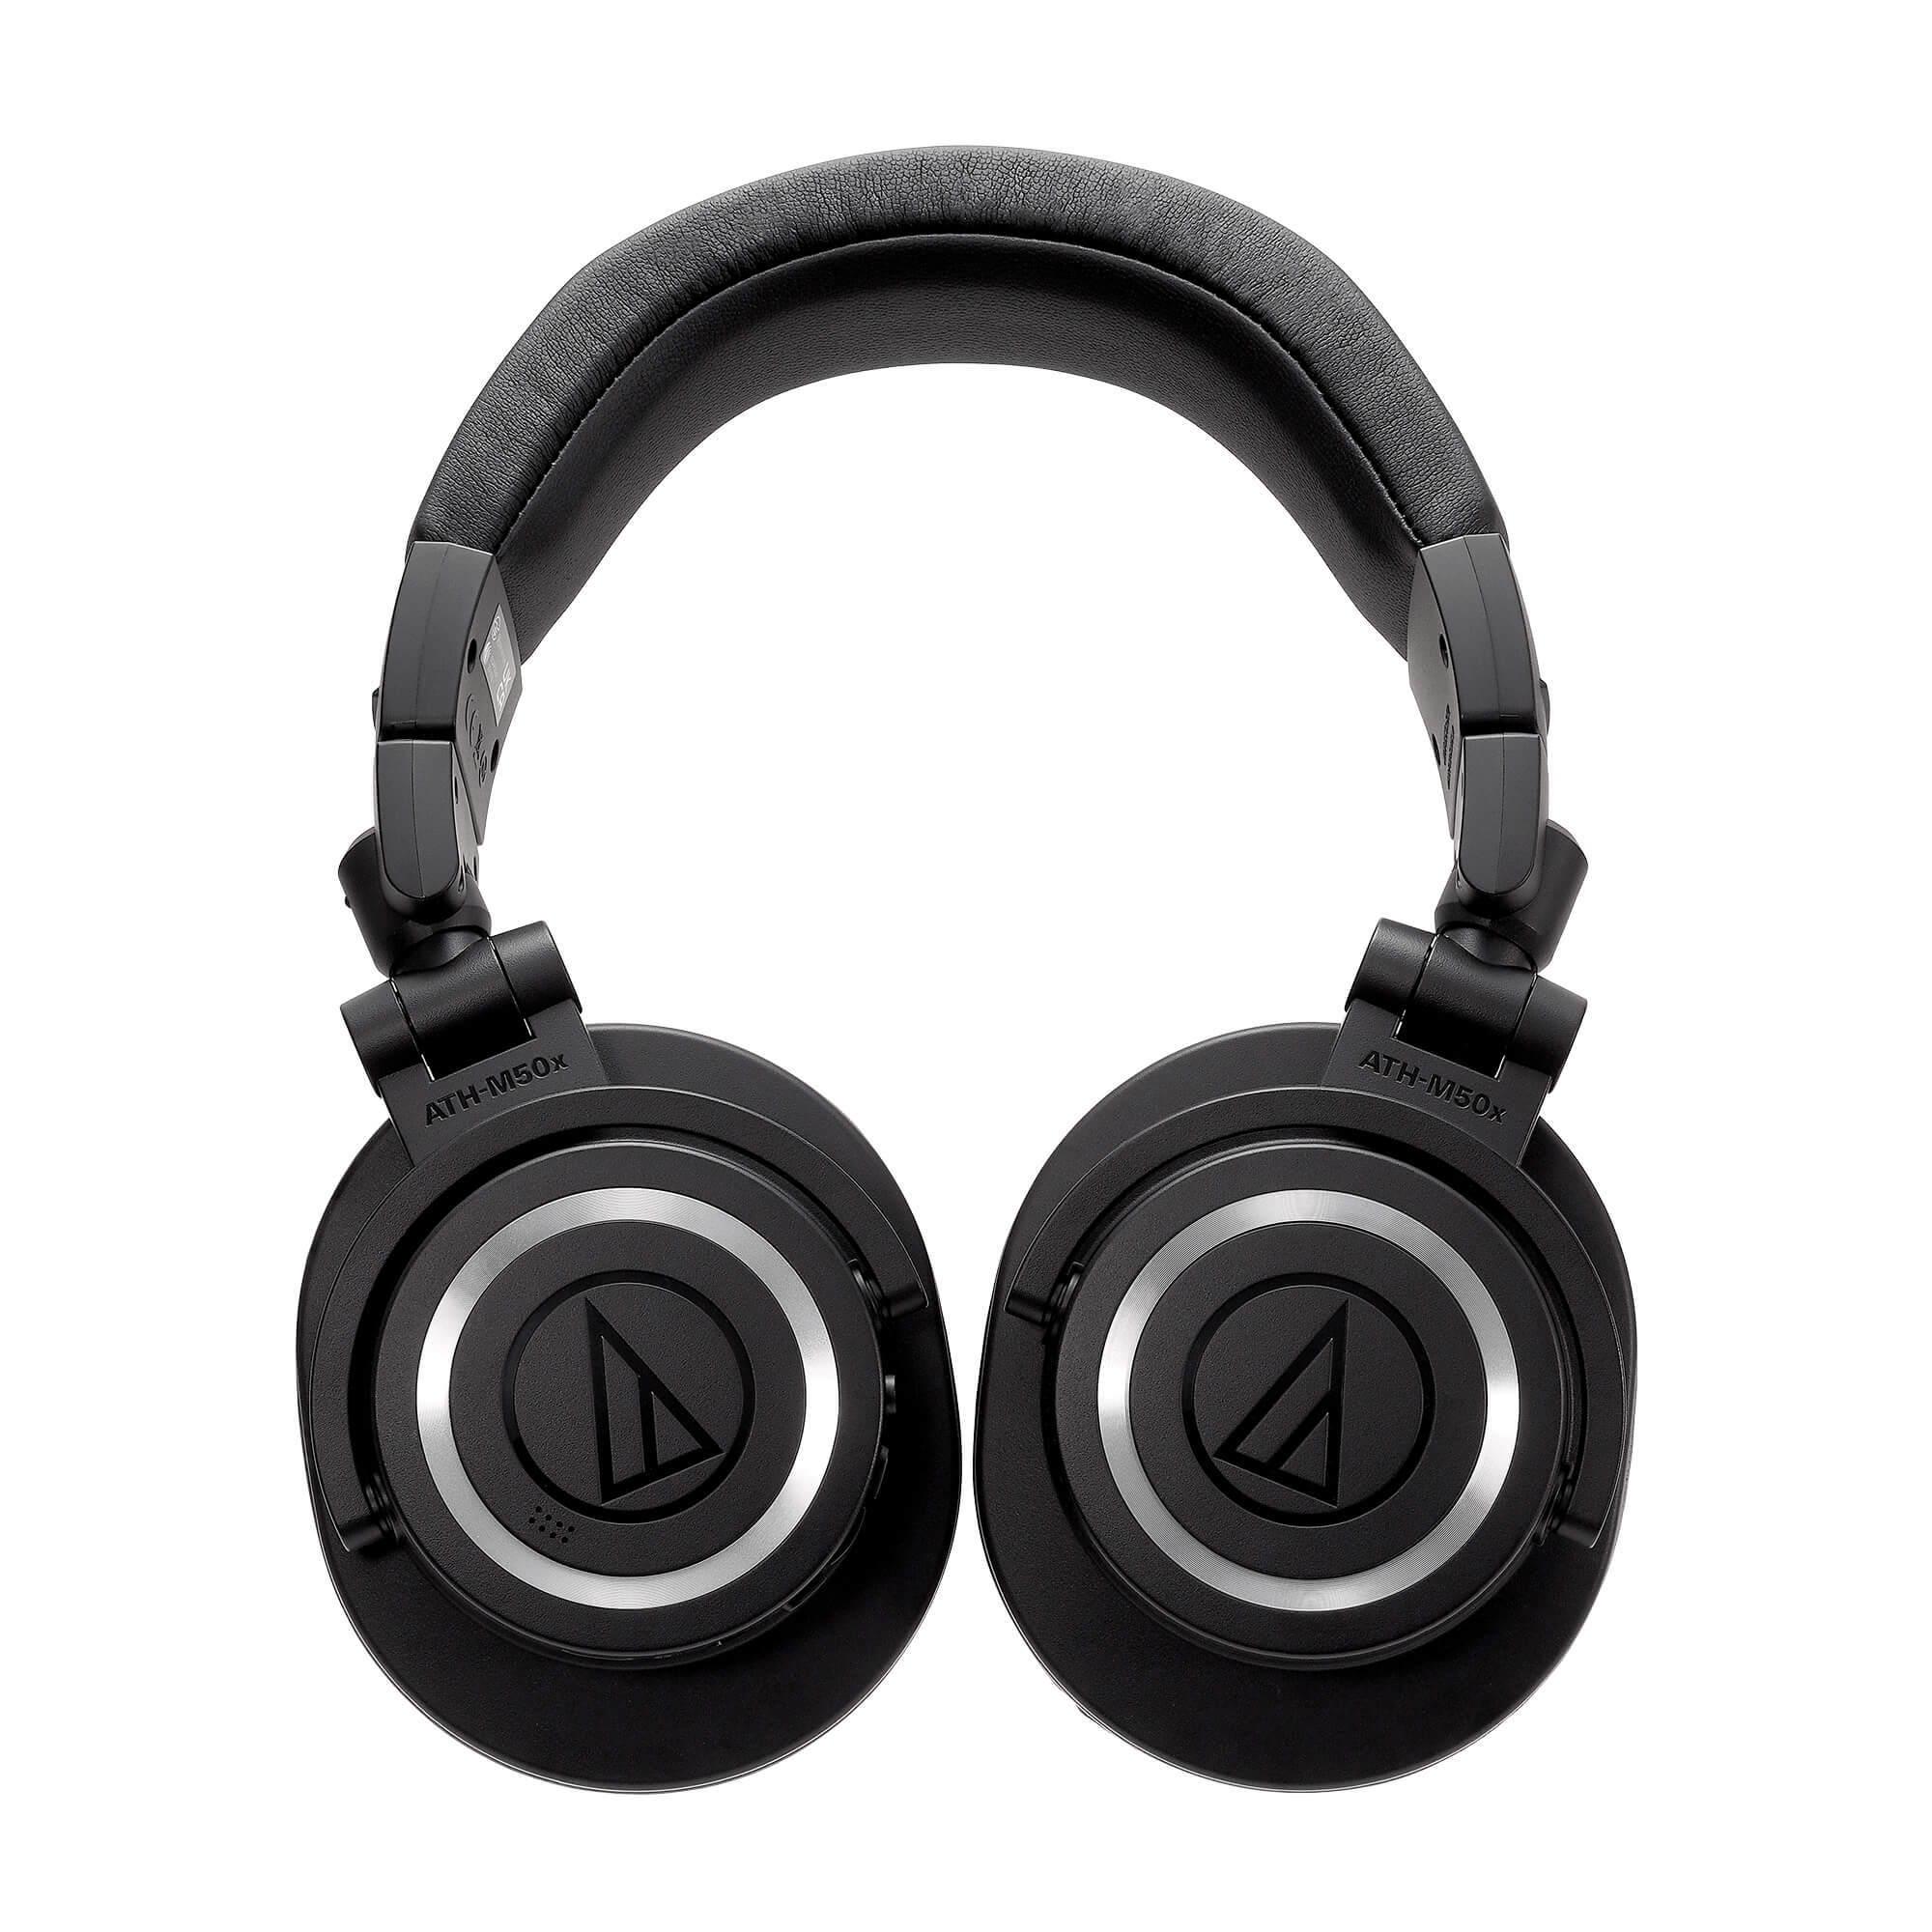 Audio-Technica ATH-M50xBT2 Bluetooth Wireless Over-Ear Headphones, ear cups rotated